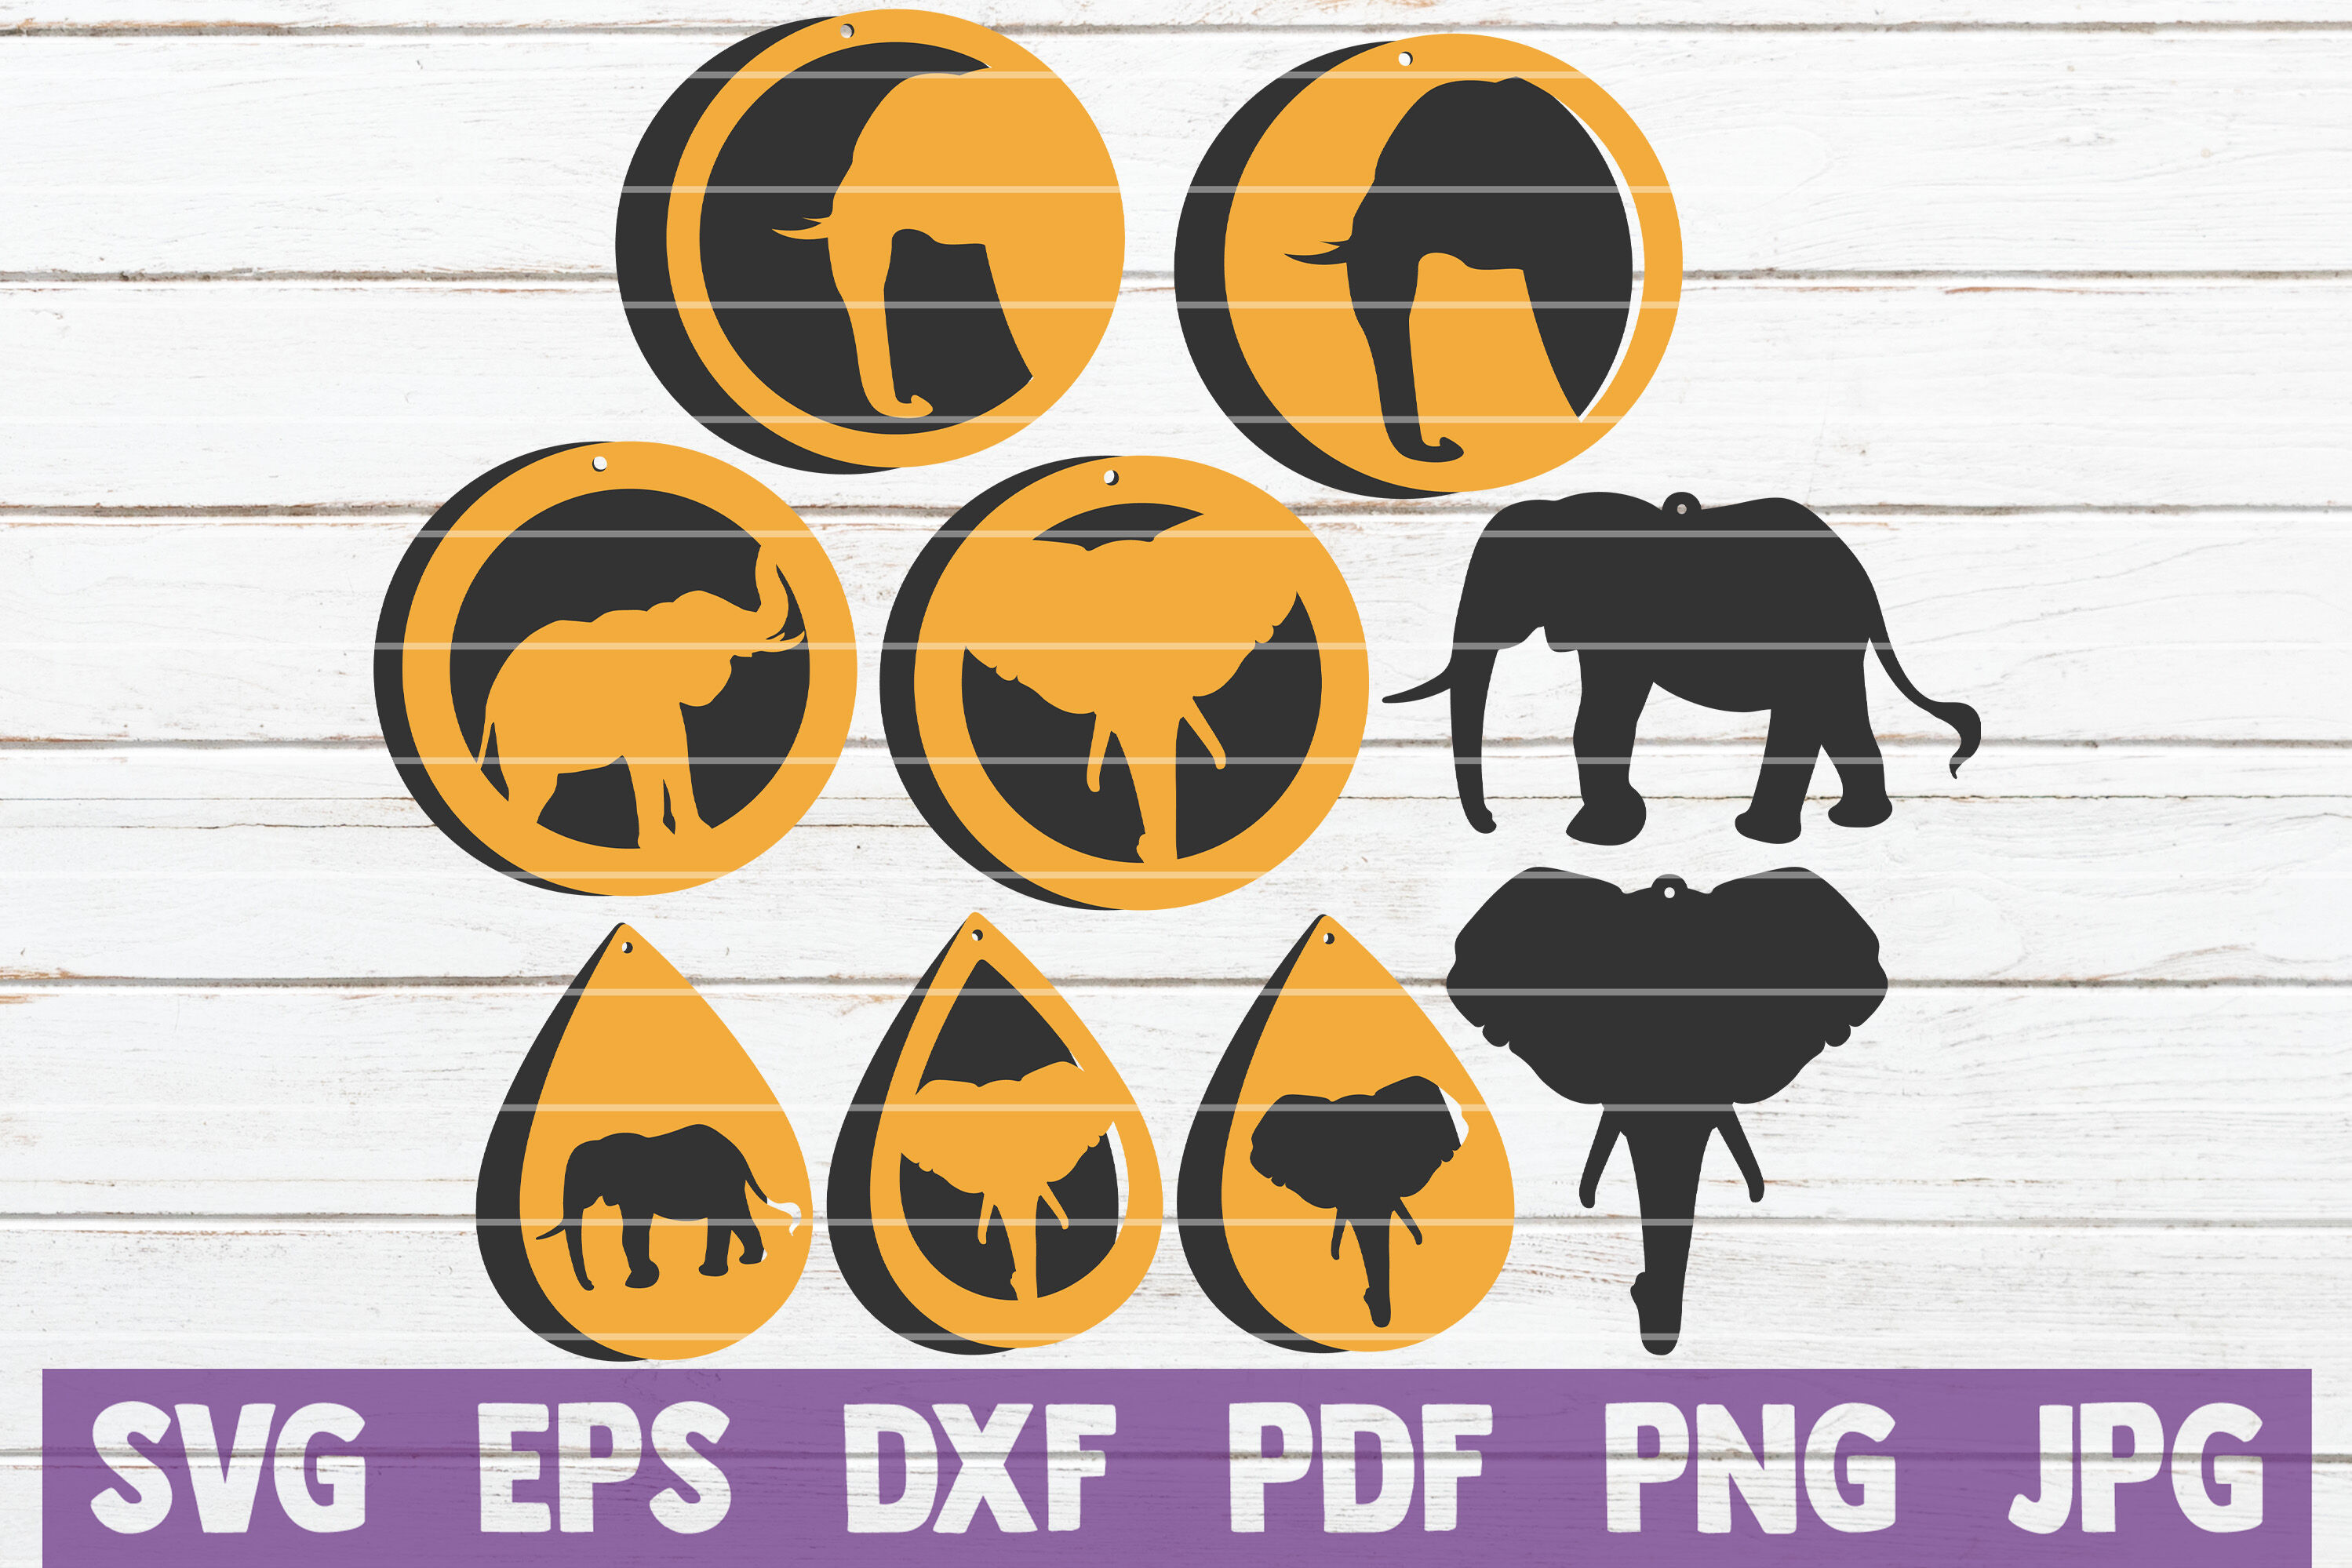 Download Elephant Earrings SVG Cut File Templates By ...